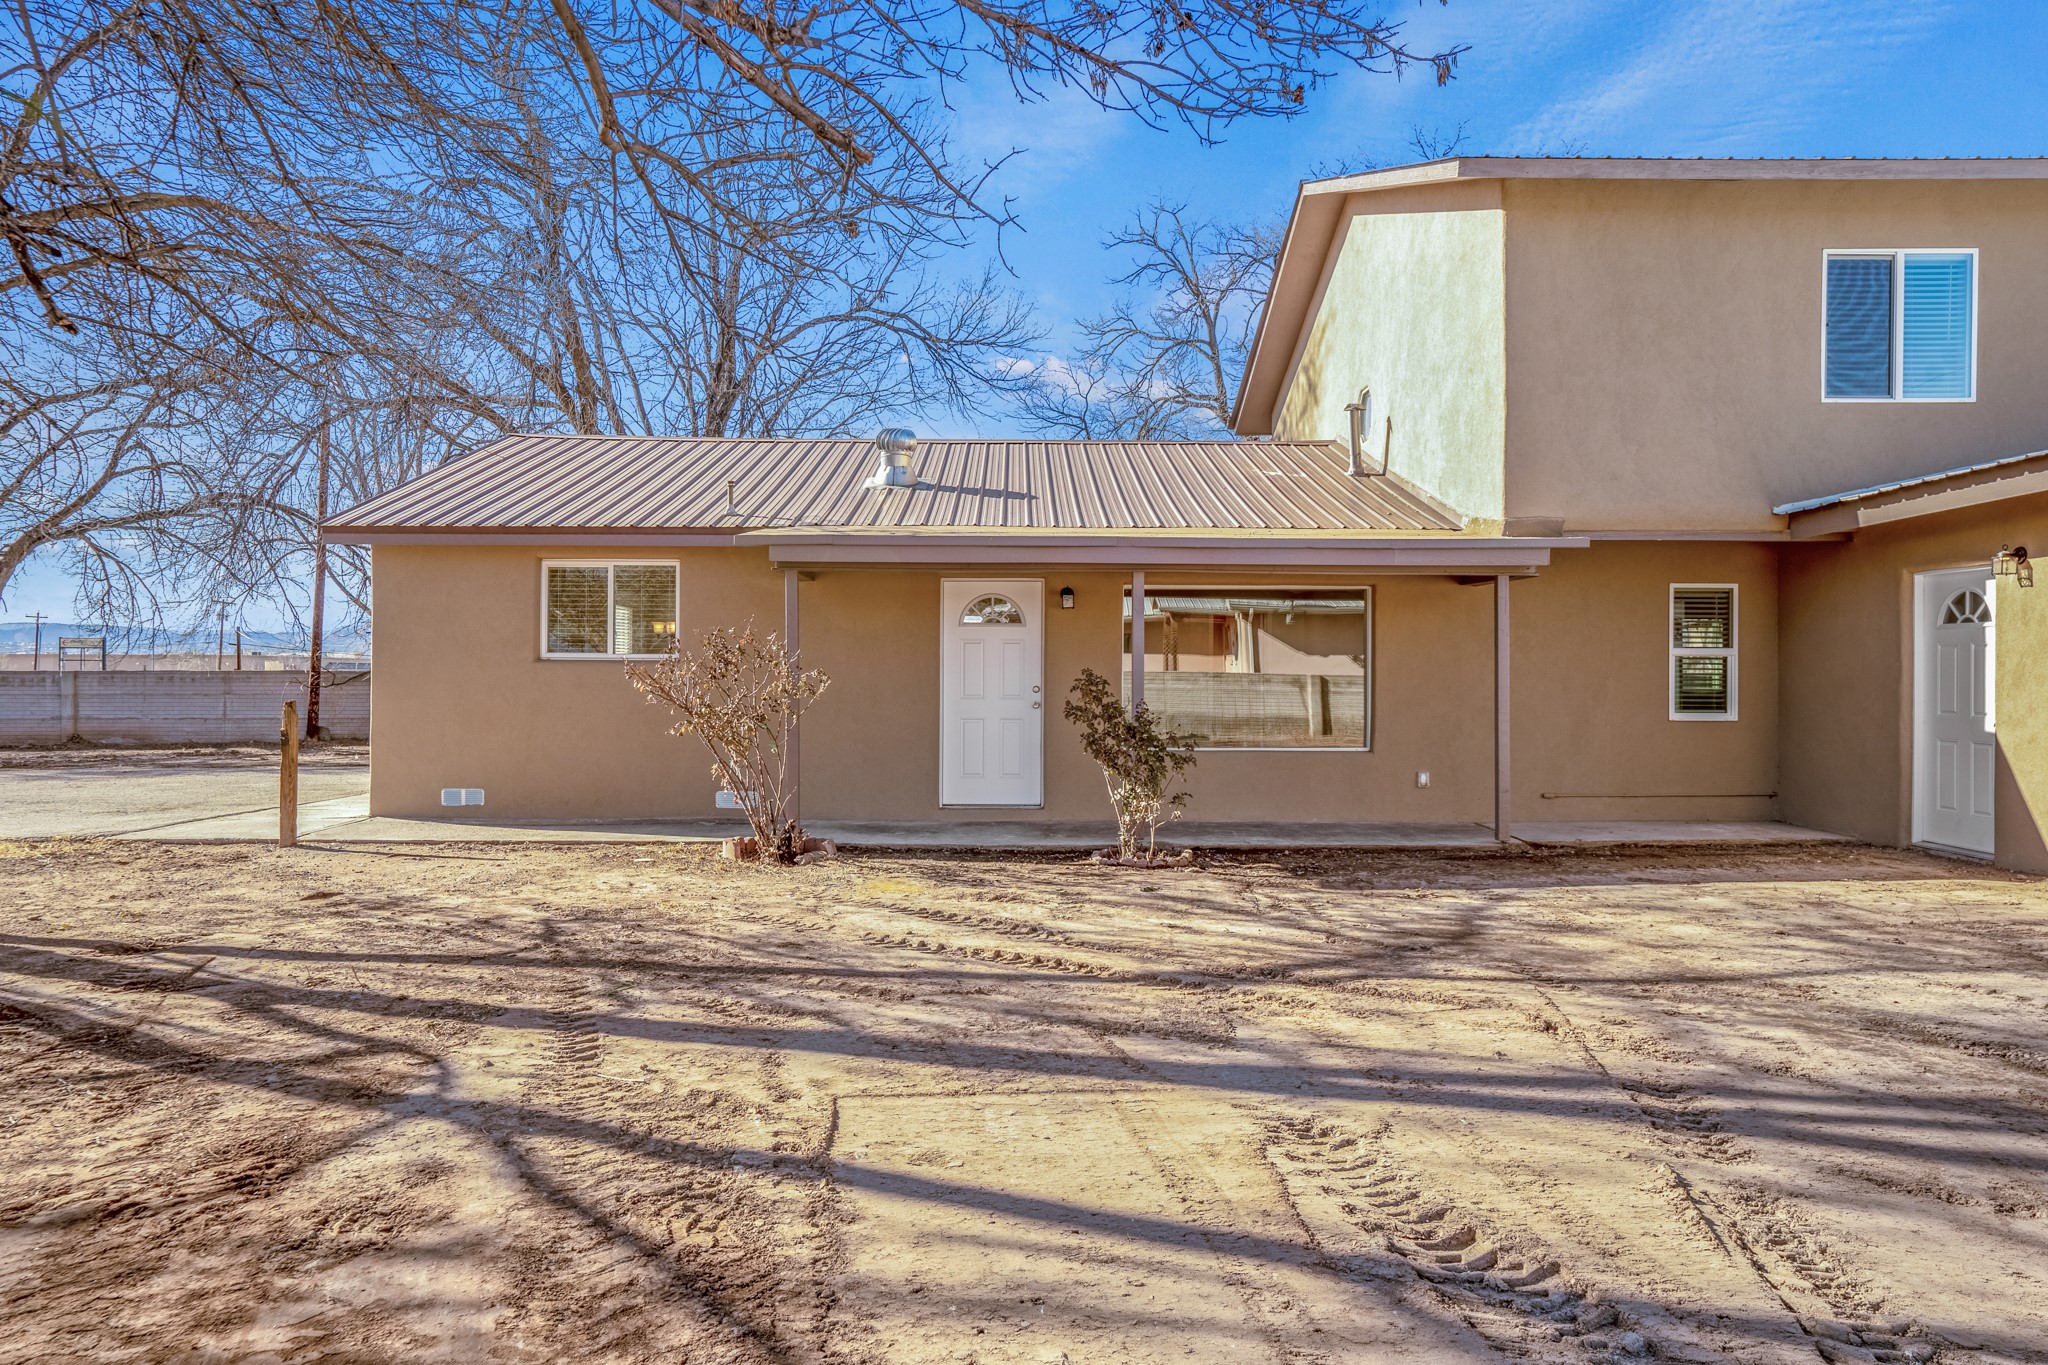 603 Fairview, Espanola, New Mexico 87532, 4 Bedrooms Bedrooms, ,3 BathroomsBathrooms,Residential,For Sale,603 Fairview,202234427